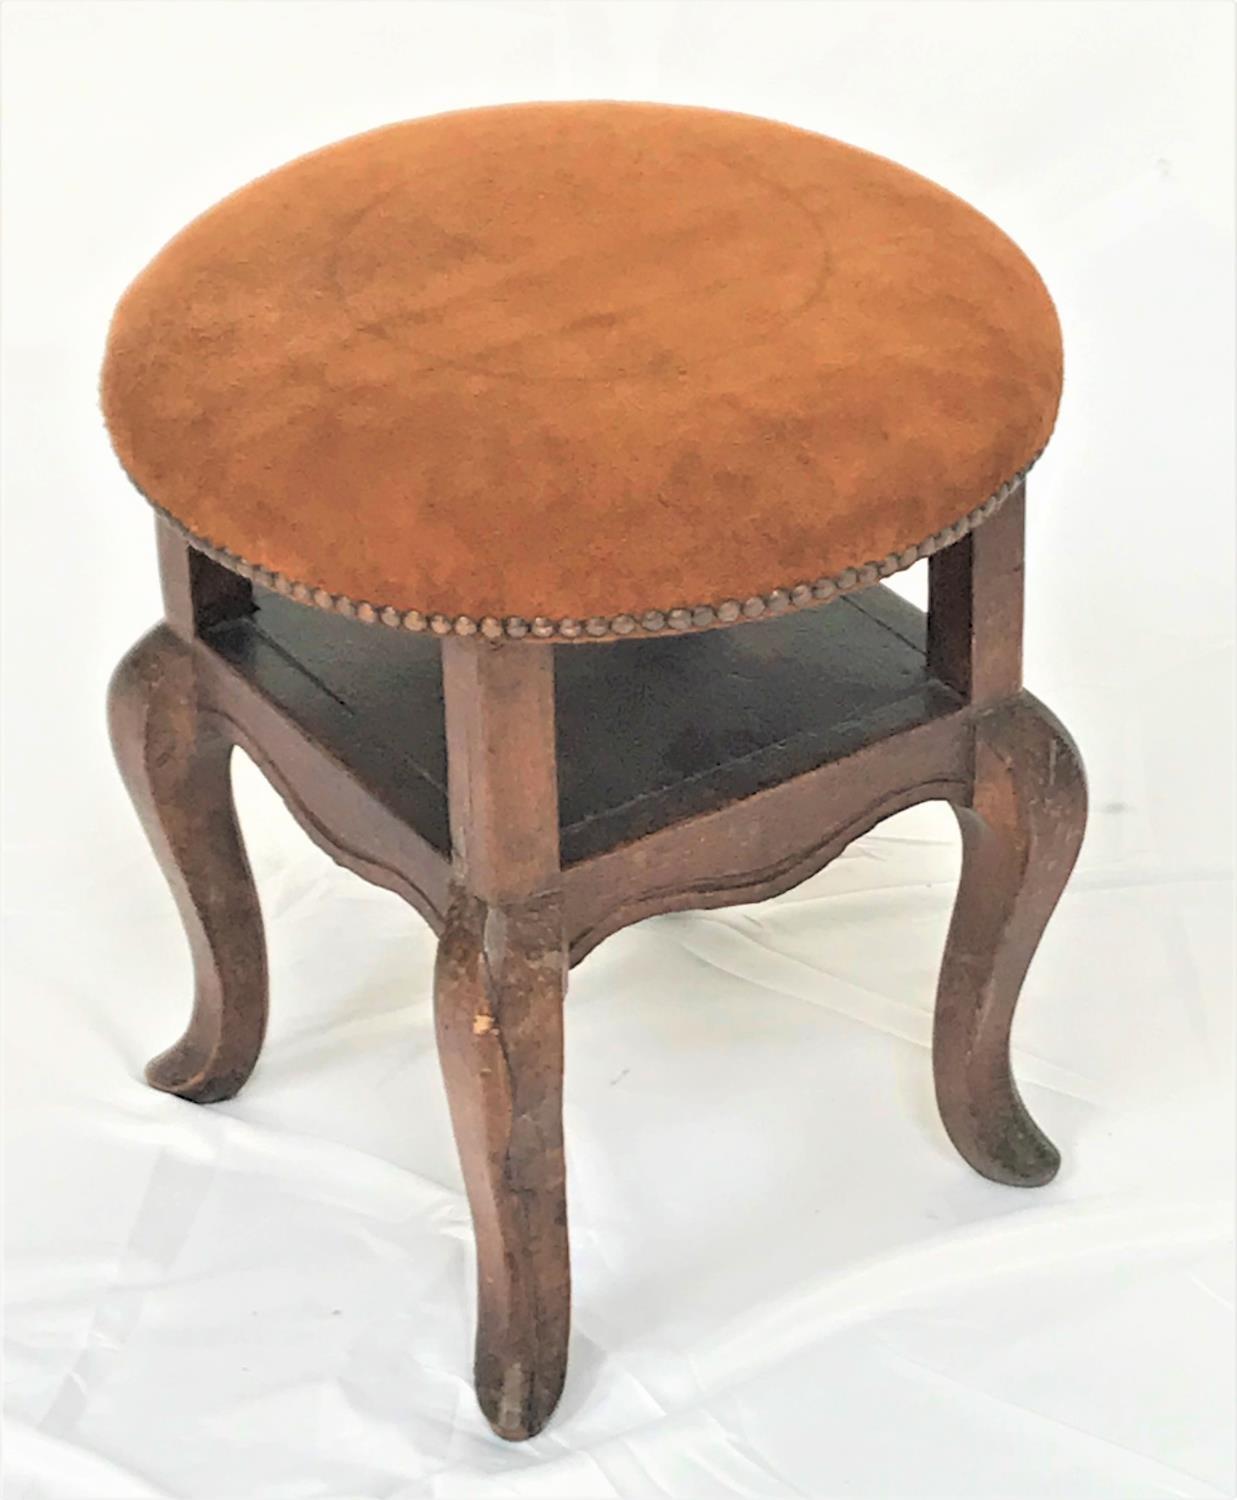 ELM CIRCULAR STOOL with a stuffover suede seat with decorative stud detail and an open shelf